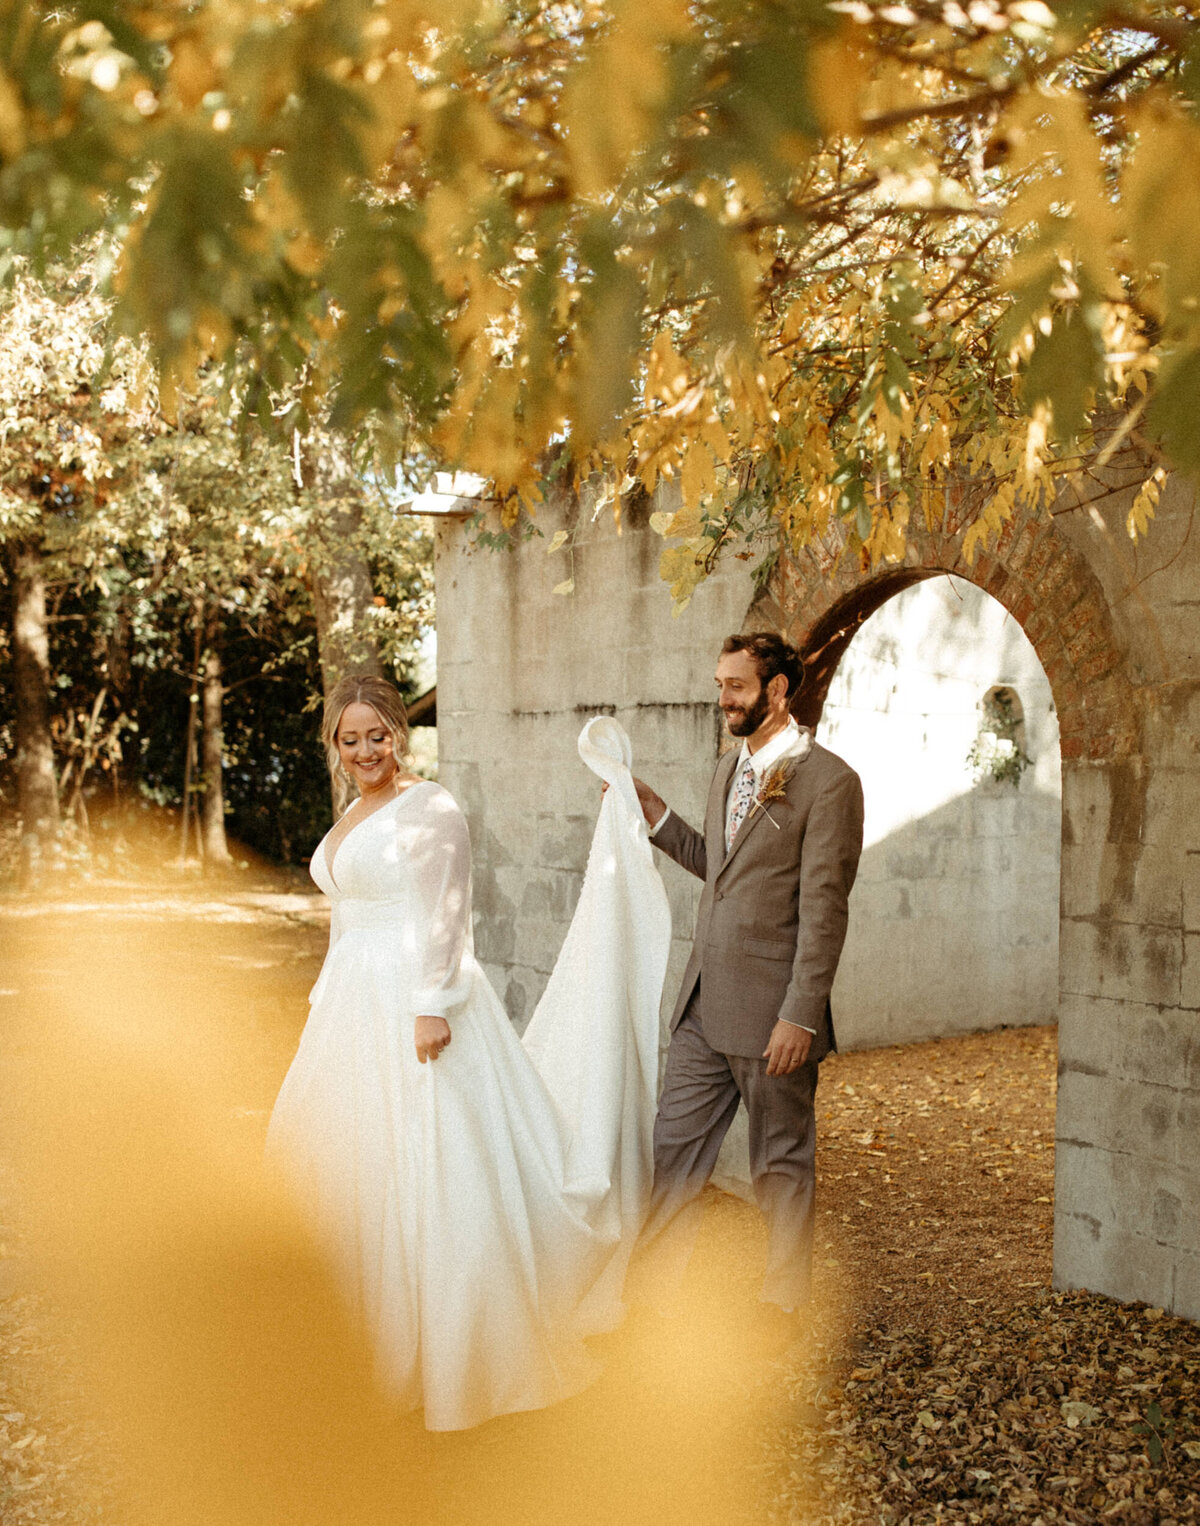 Groom holding bride's wedding dress train up as they walk underneath the branches of a tree with fall foliage